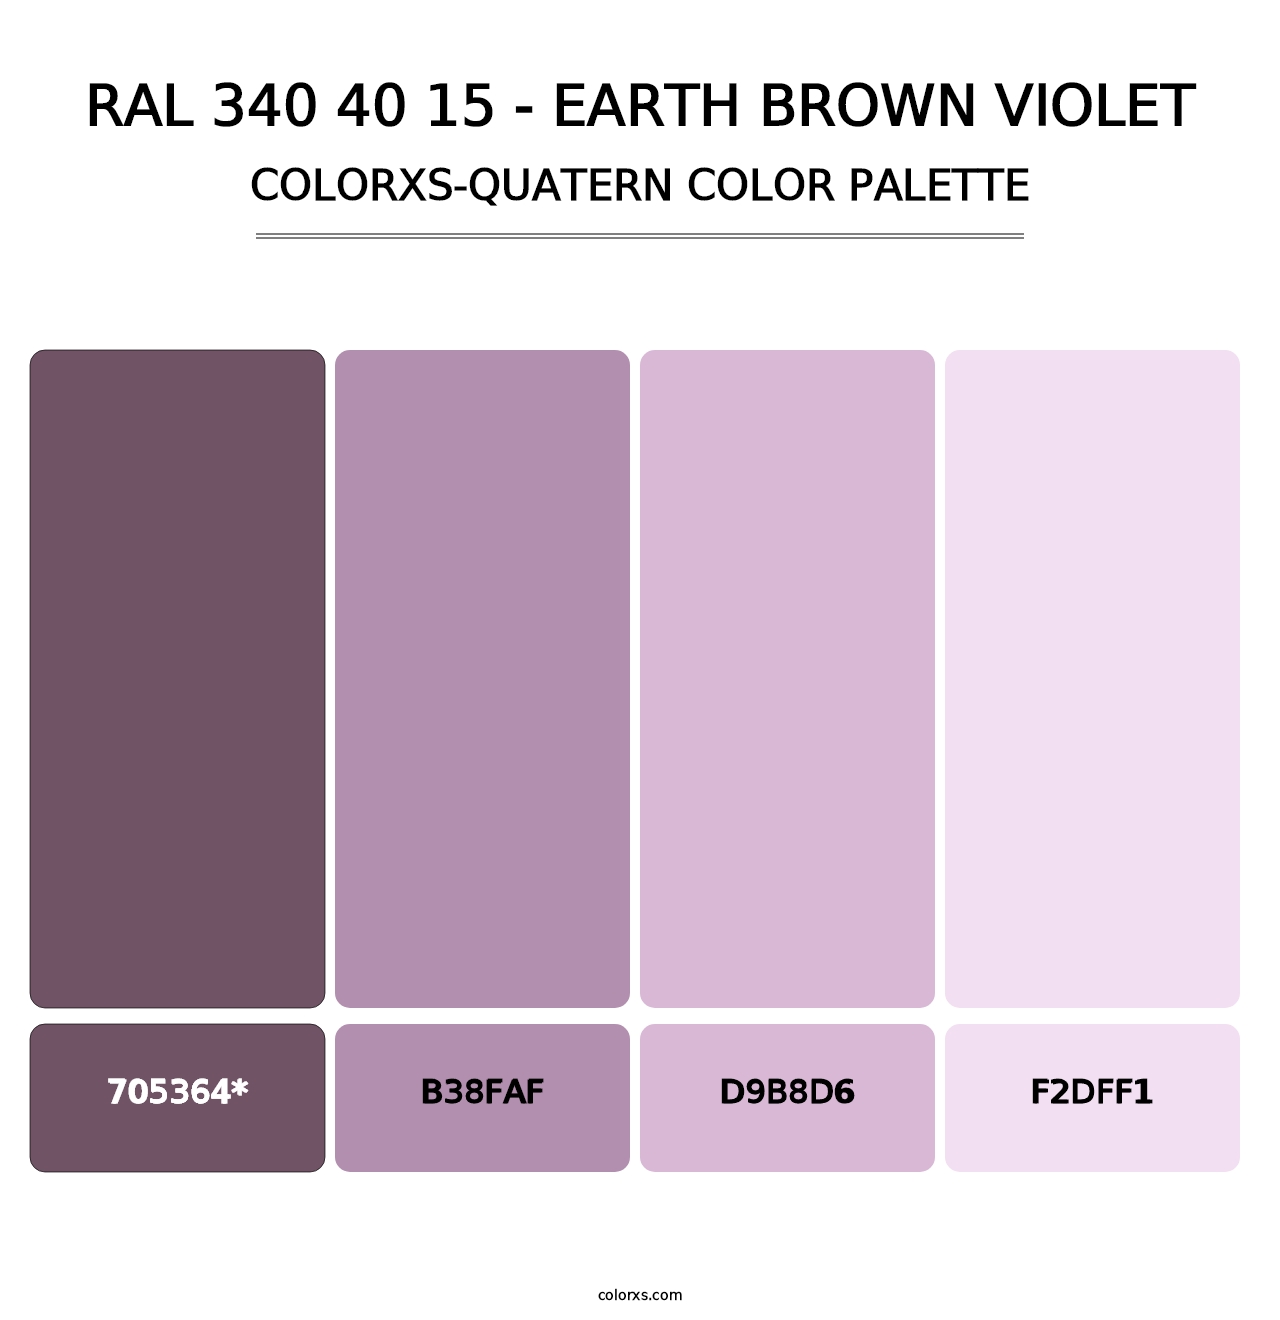 RAL 340 40 15 - Earth Brown Violet - Colorxs Quatern Palette